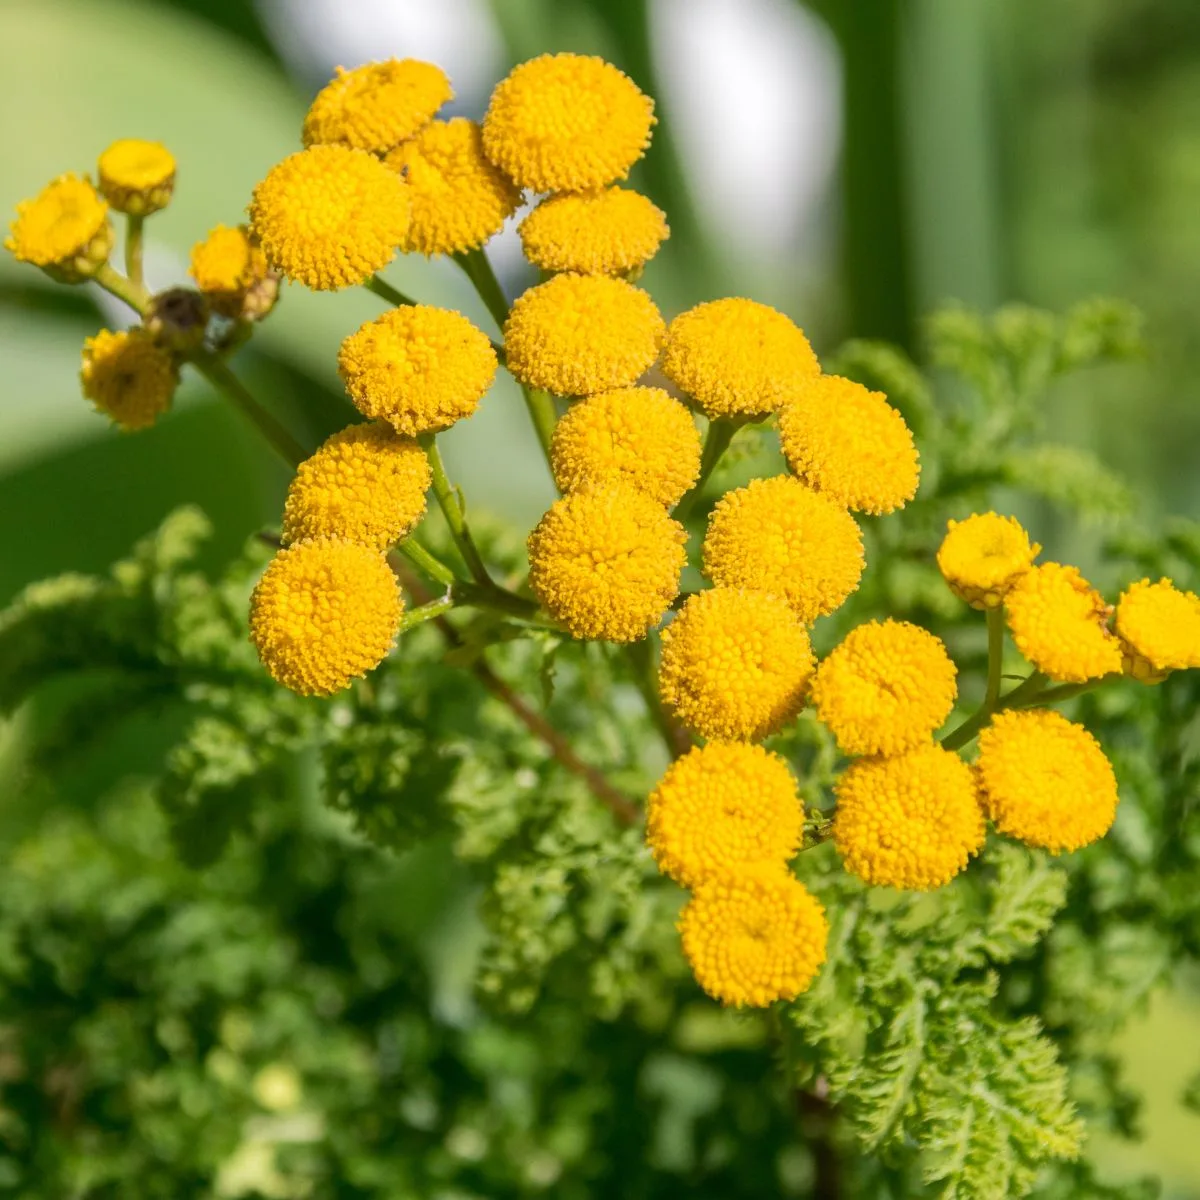 Yellow common tansy flowers.